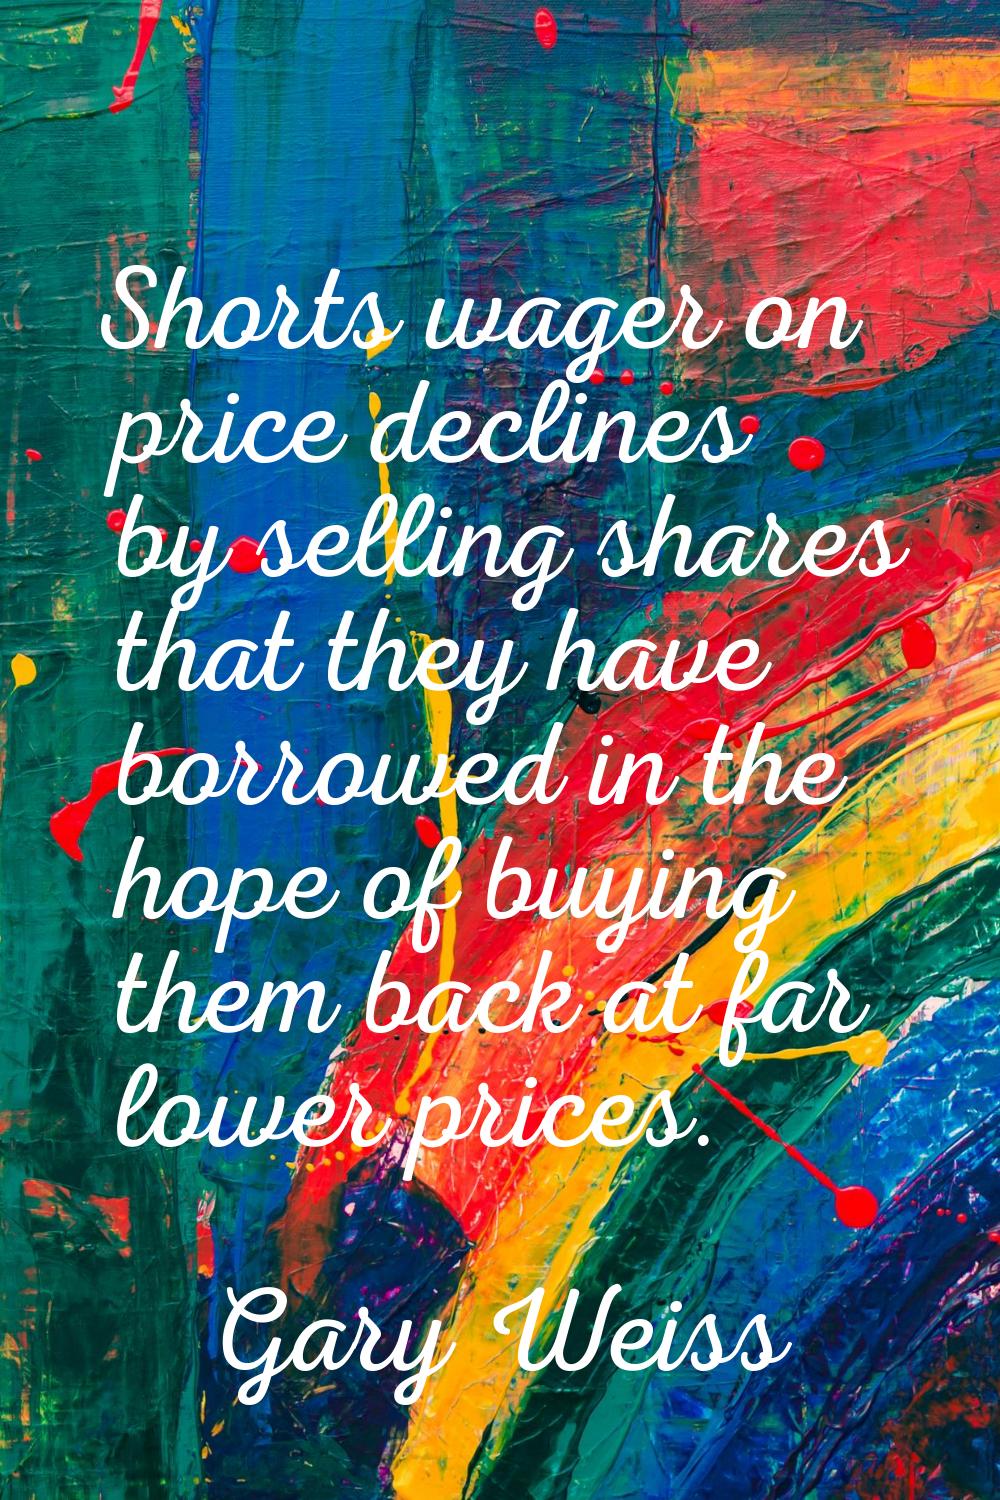 Shorts wager on price declines by selling shares that they have borrowed in the hope of buying them